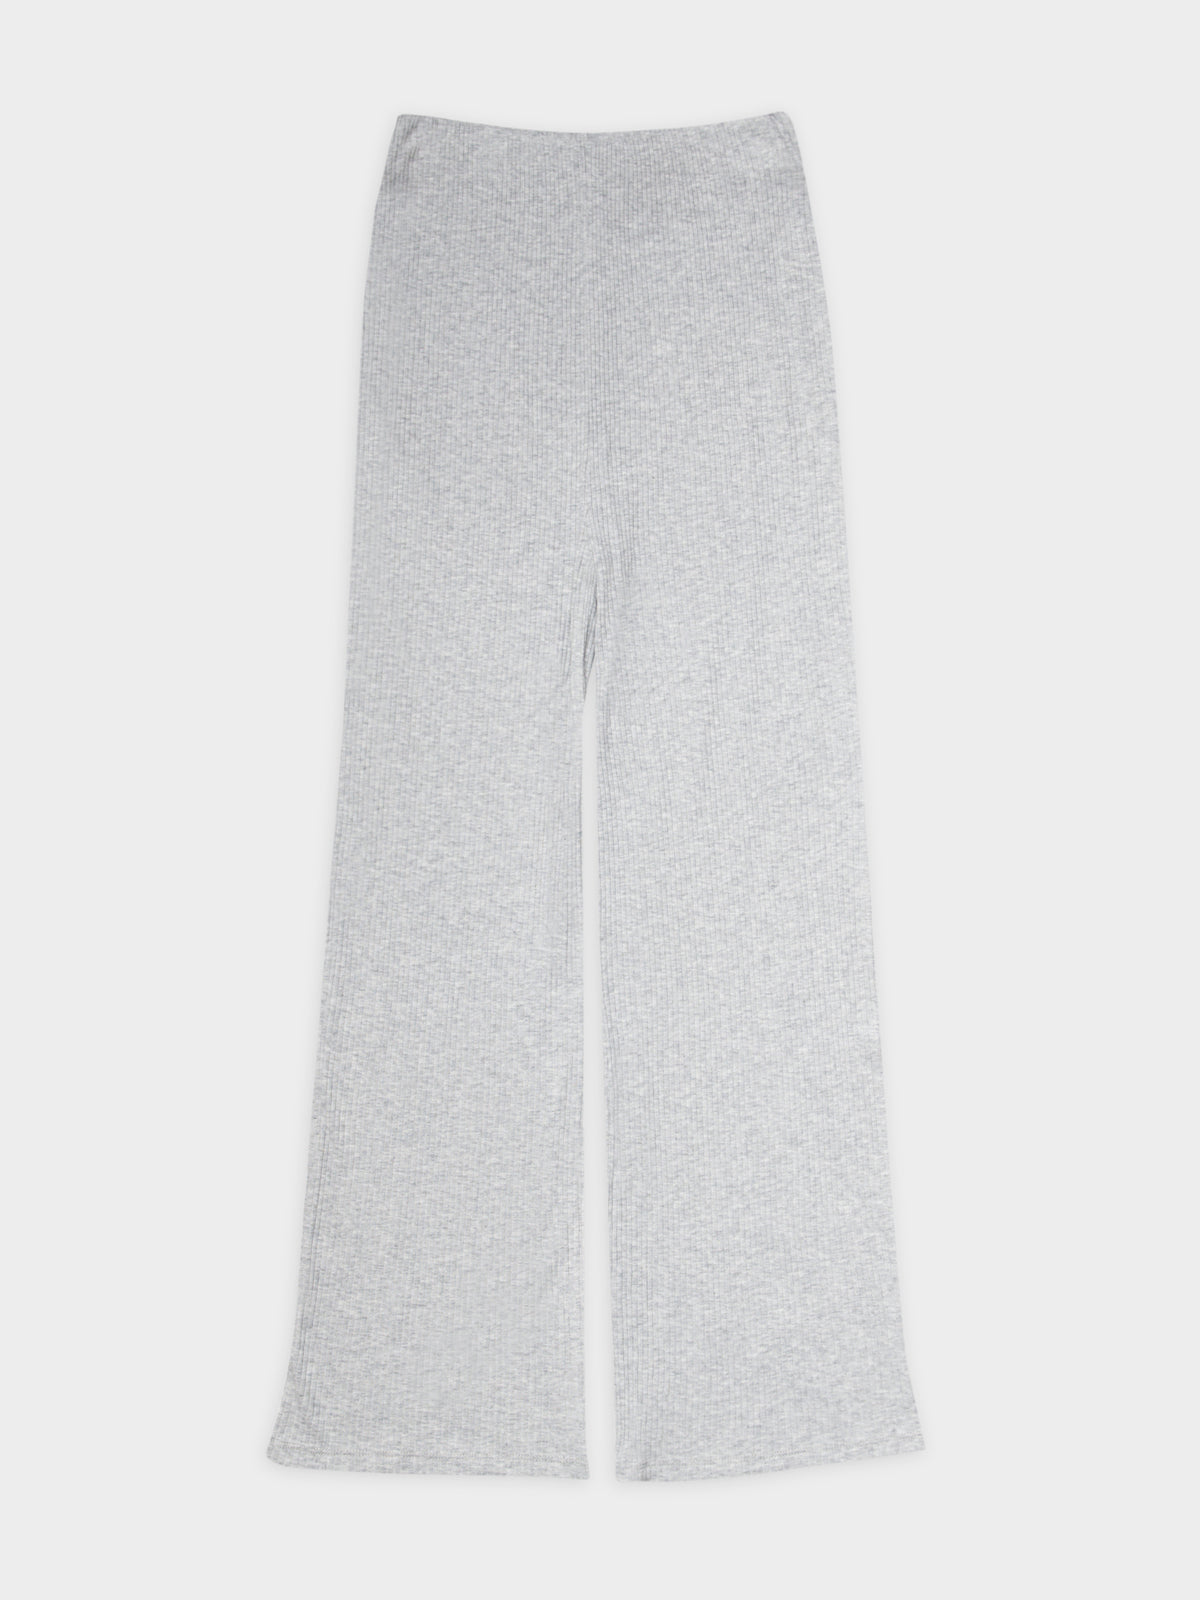 Ribbed Lounge Culotte Pants in Grey Marle